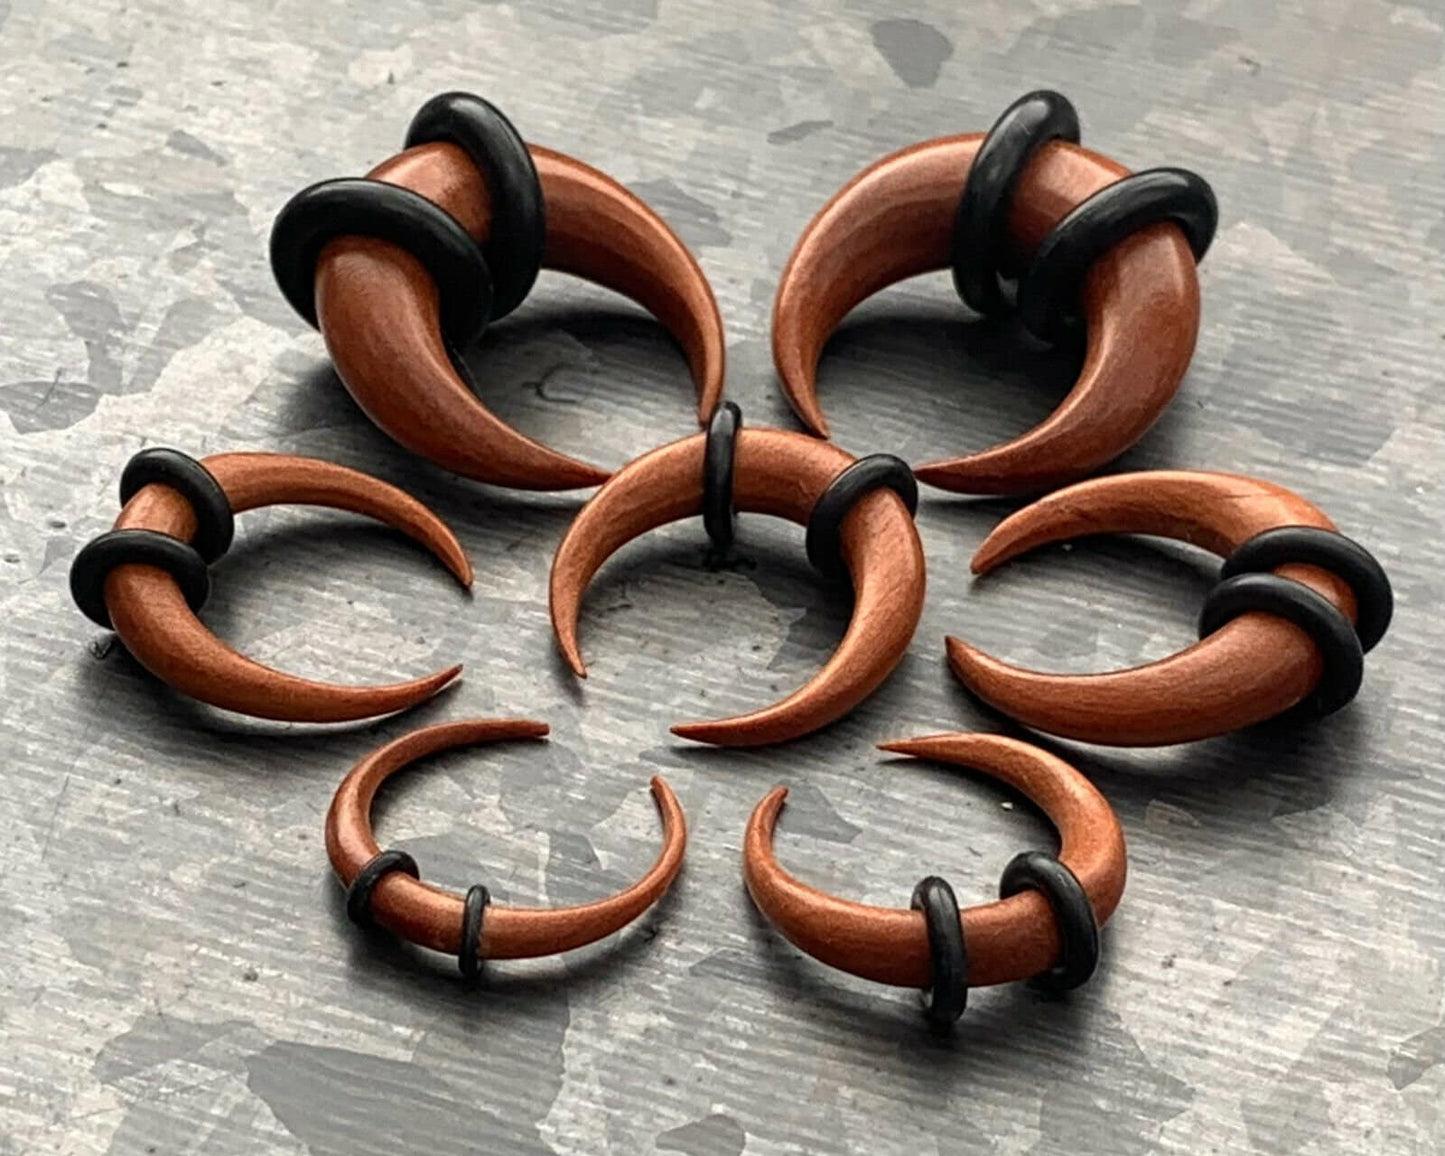 PAIR of Organic Sawo Wood Buffalo Tapers / Plugs with O-Rings - Expanders - Gauges 8g (3mm) thru 0g (